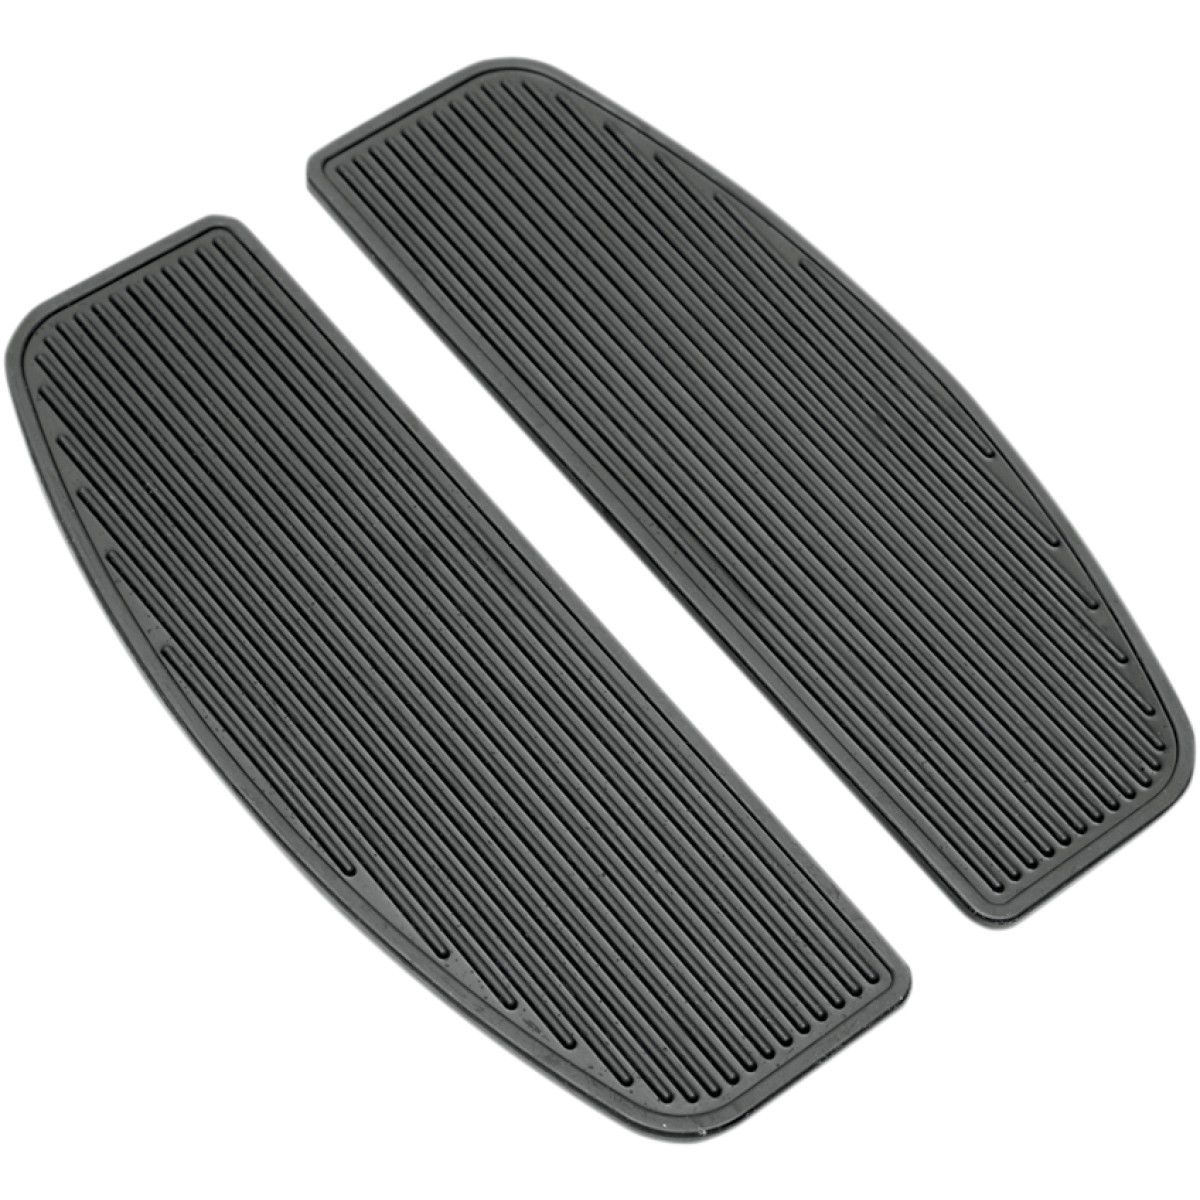 Drag Specialties Replacement OEM Rubber Pad for 06-UP Harley